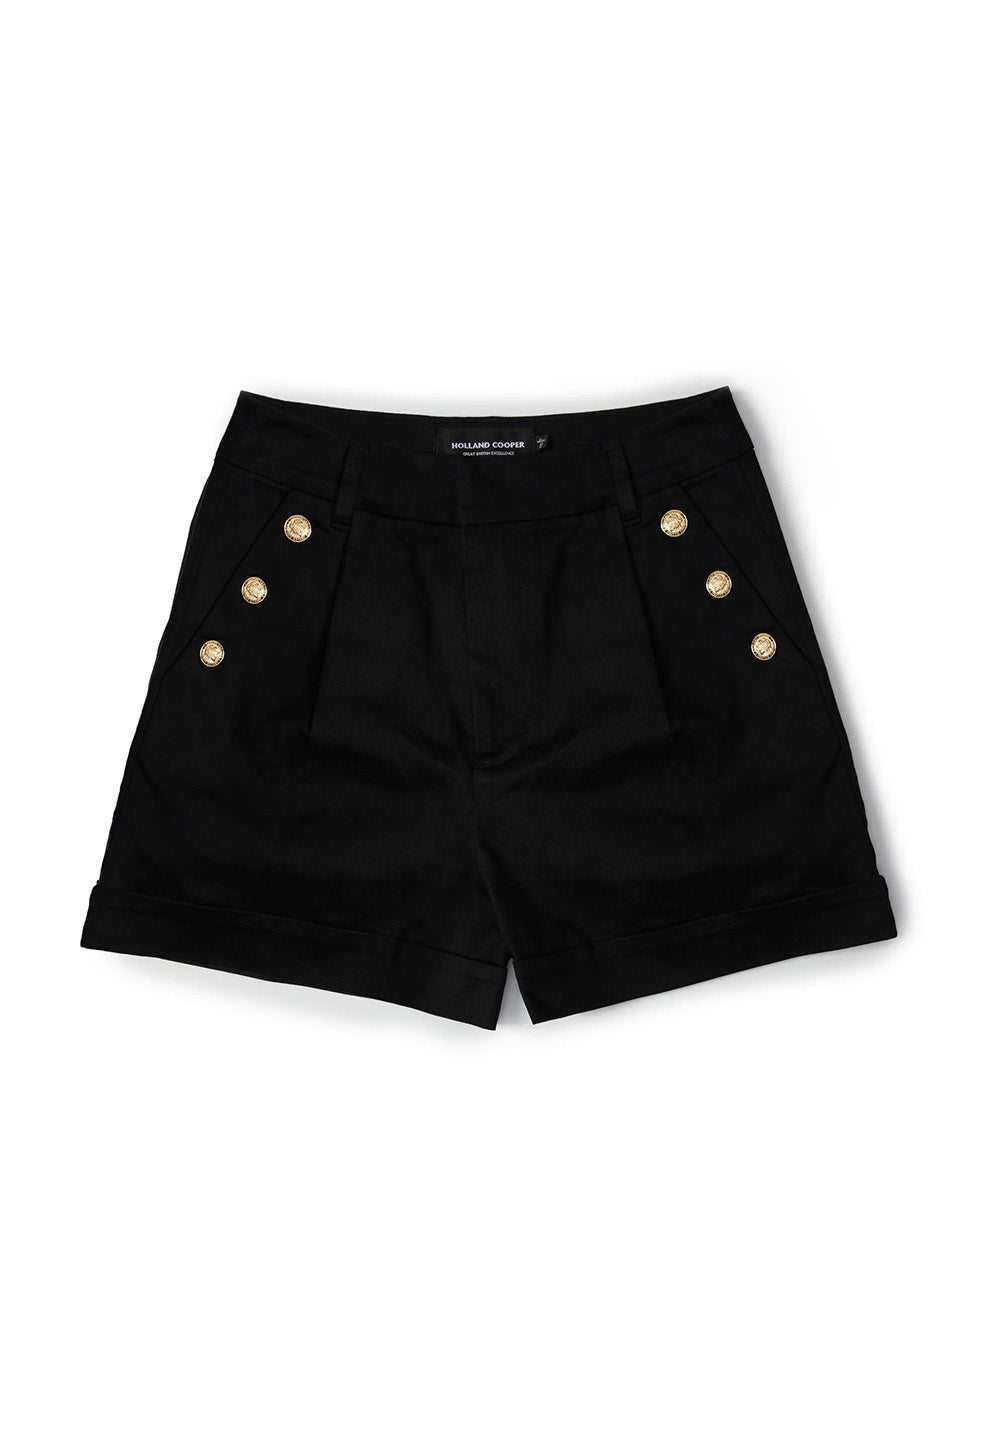 Amoria Tailored Short - Black sold by Angel Divine